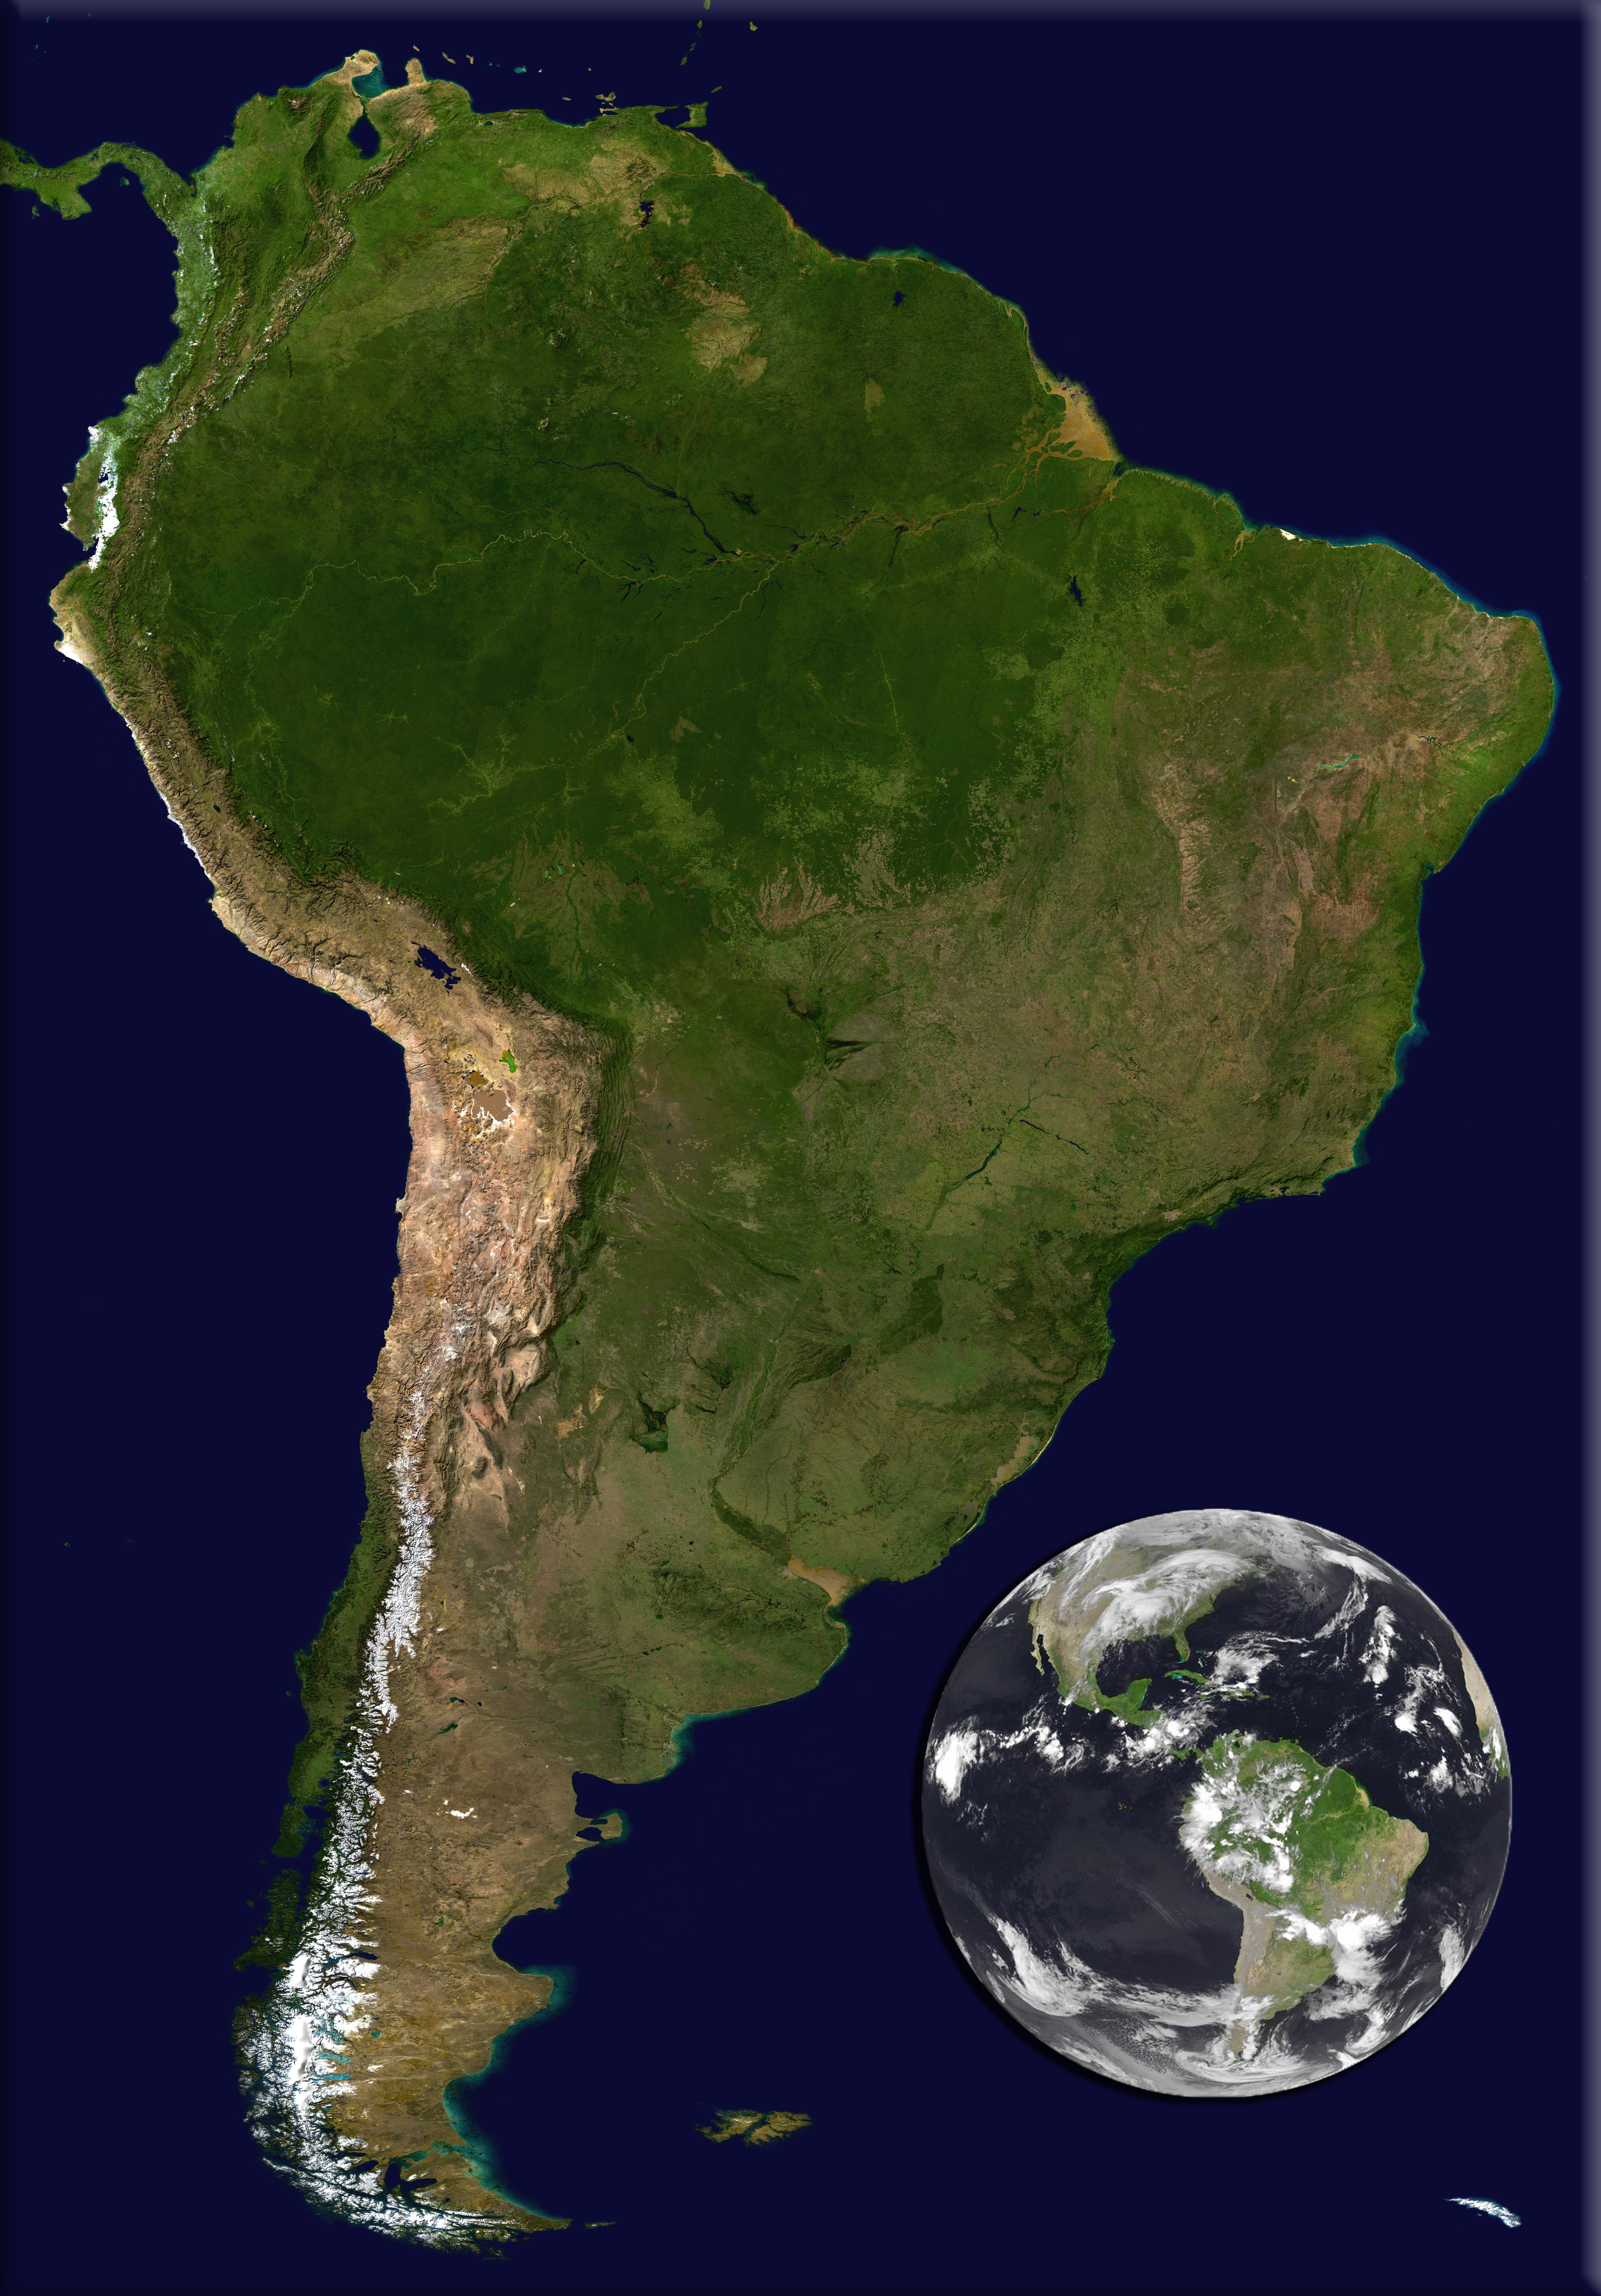 South America is a continent located in the Western Hemisphere, mostly in the Southern Hemisphere, with a relatively small portion in the Northern Hemisphere. The continent is also considered a subcontinent of the Americas